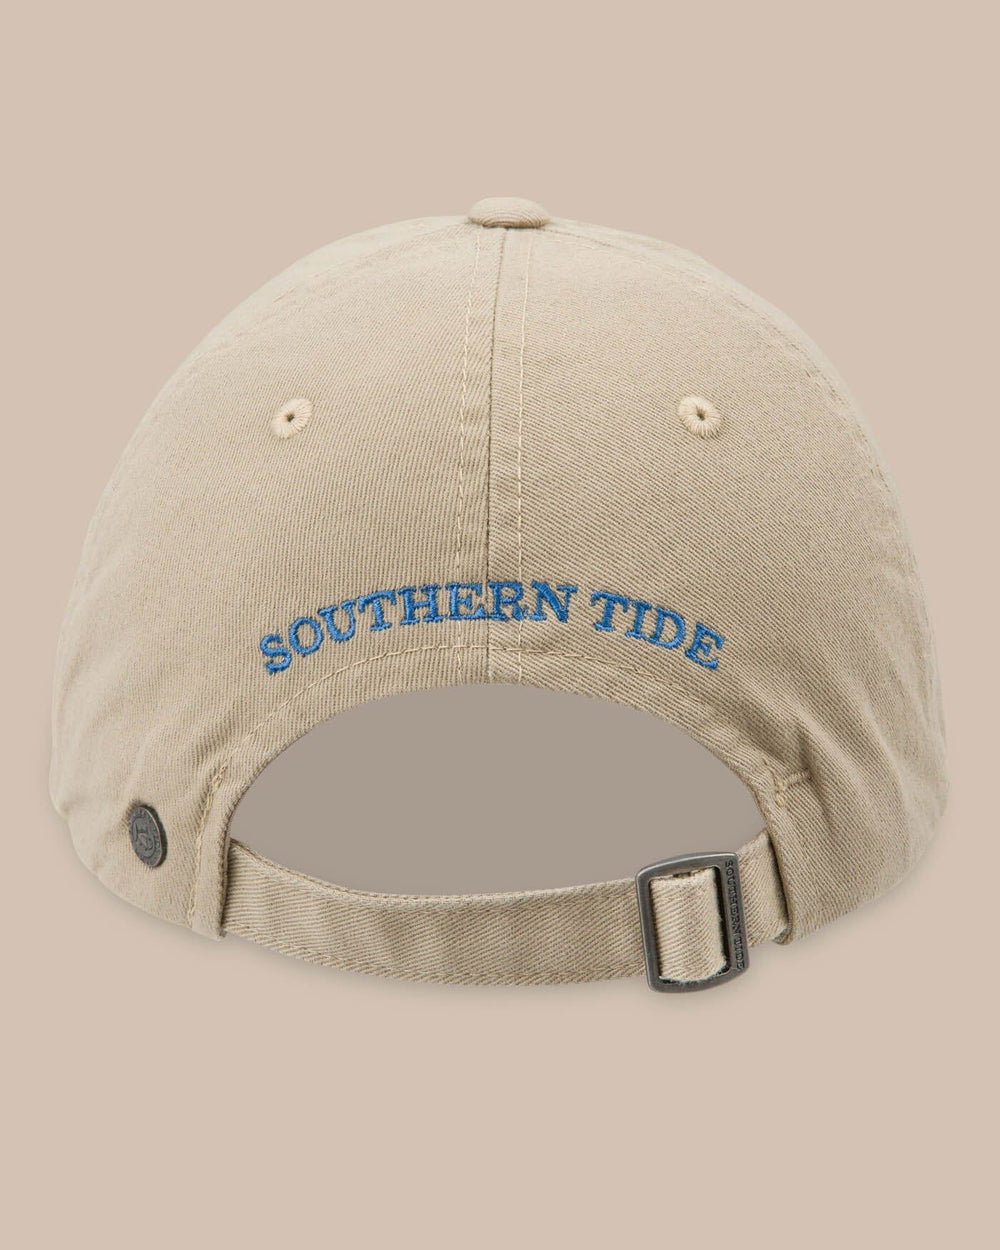 The back of the Skipjack Hat by Southern Tide - Khaki